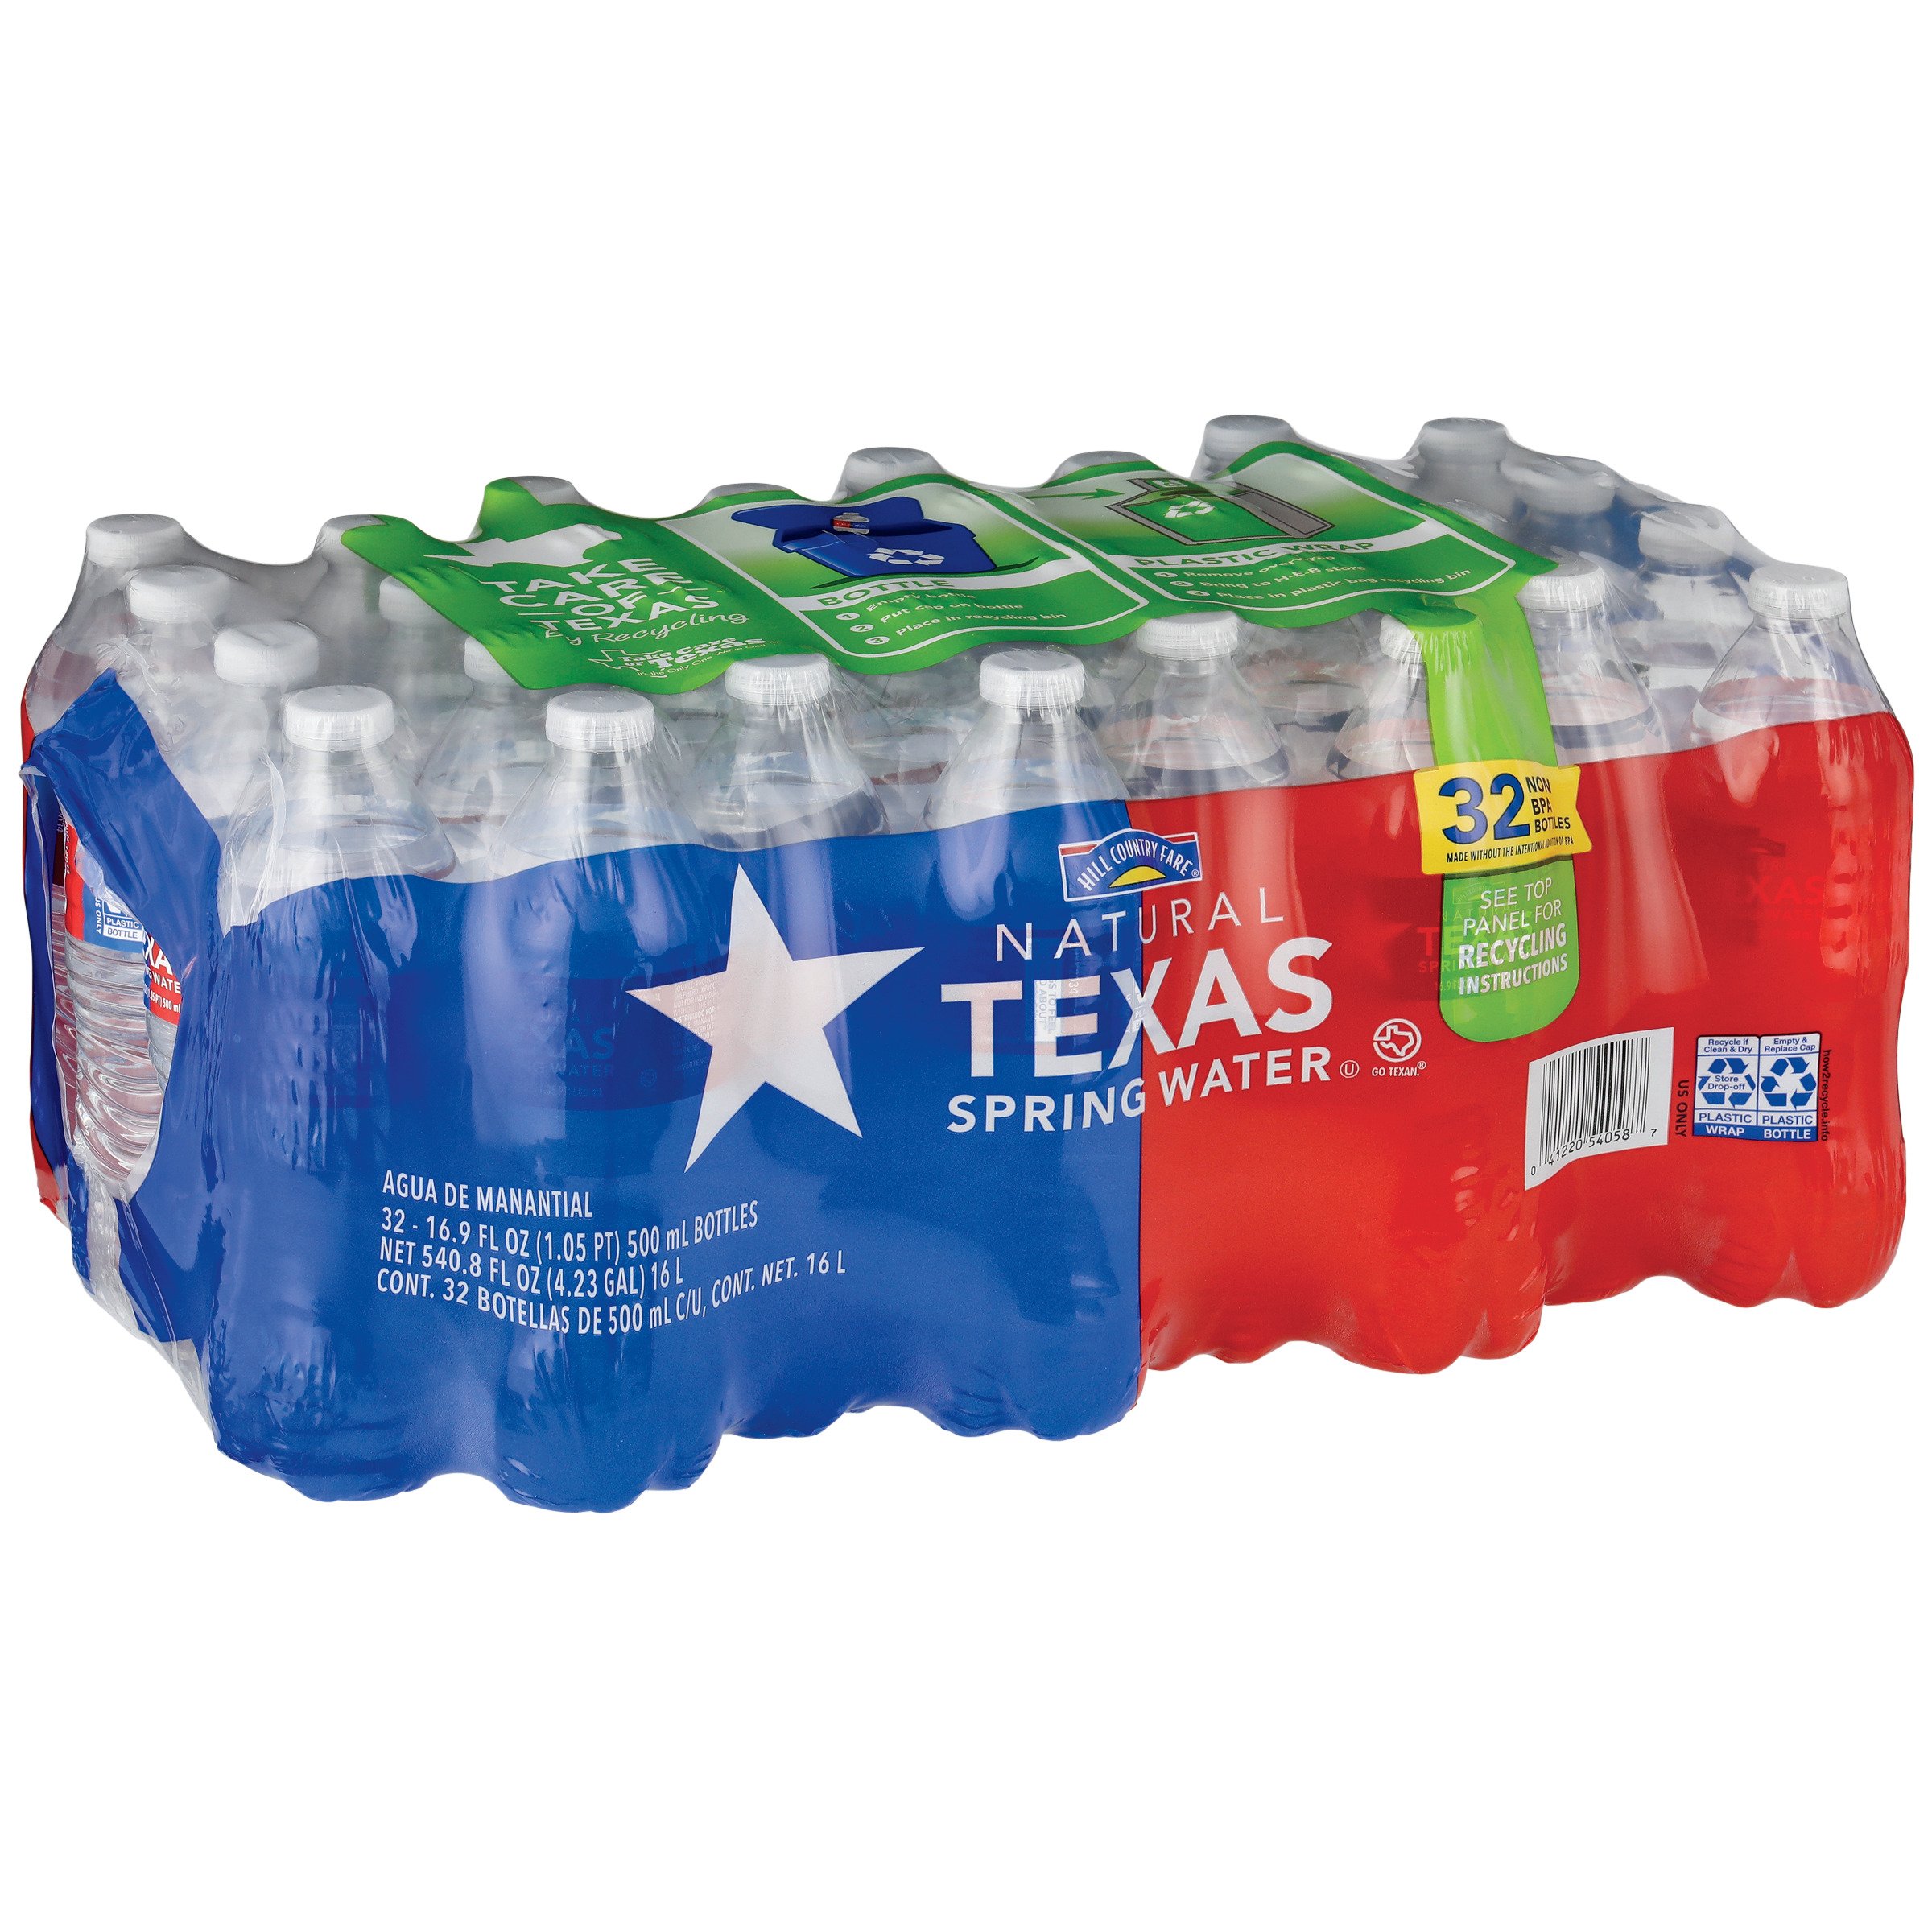 Hill Country Fare Drinking Water 16.9 oz Bottles